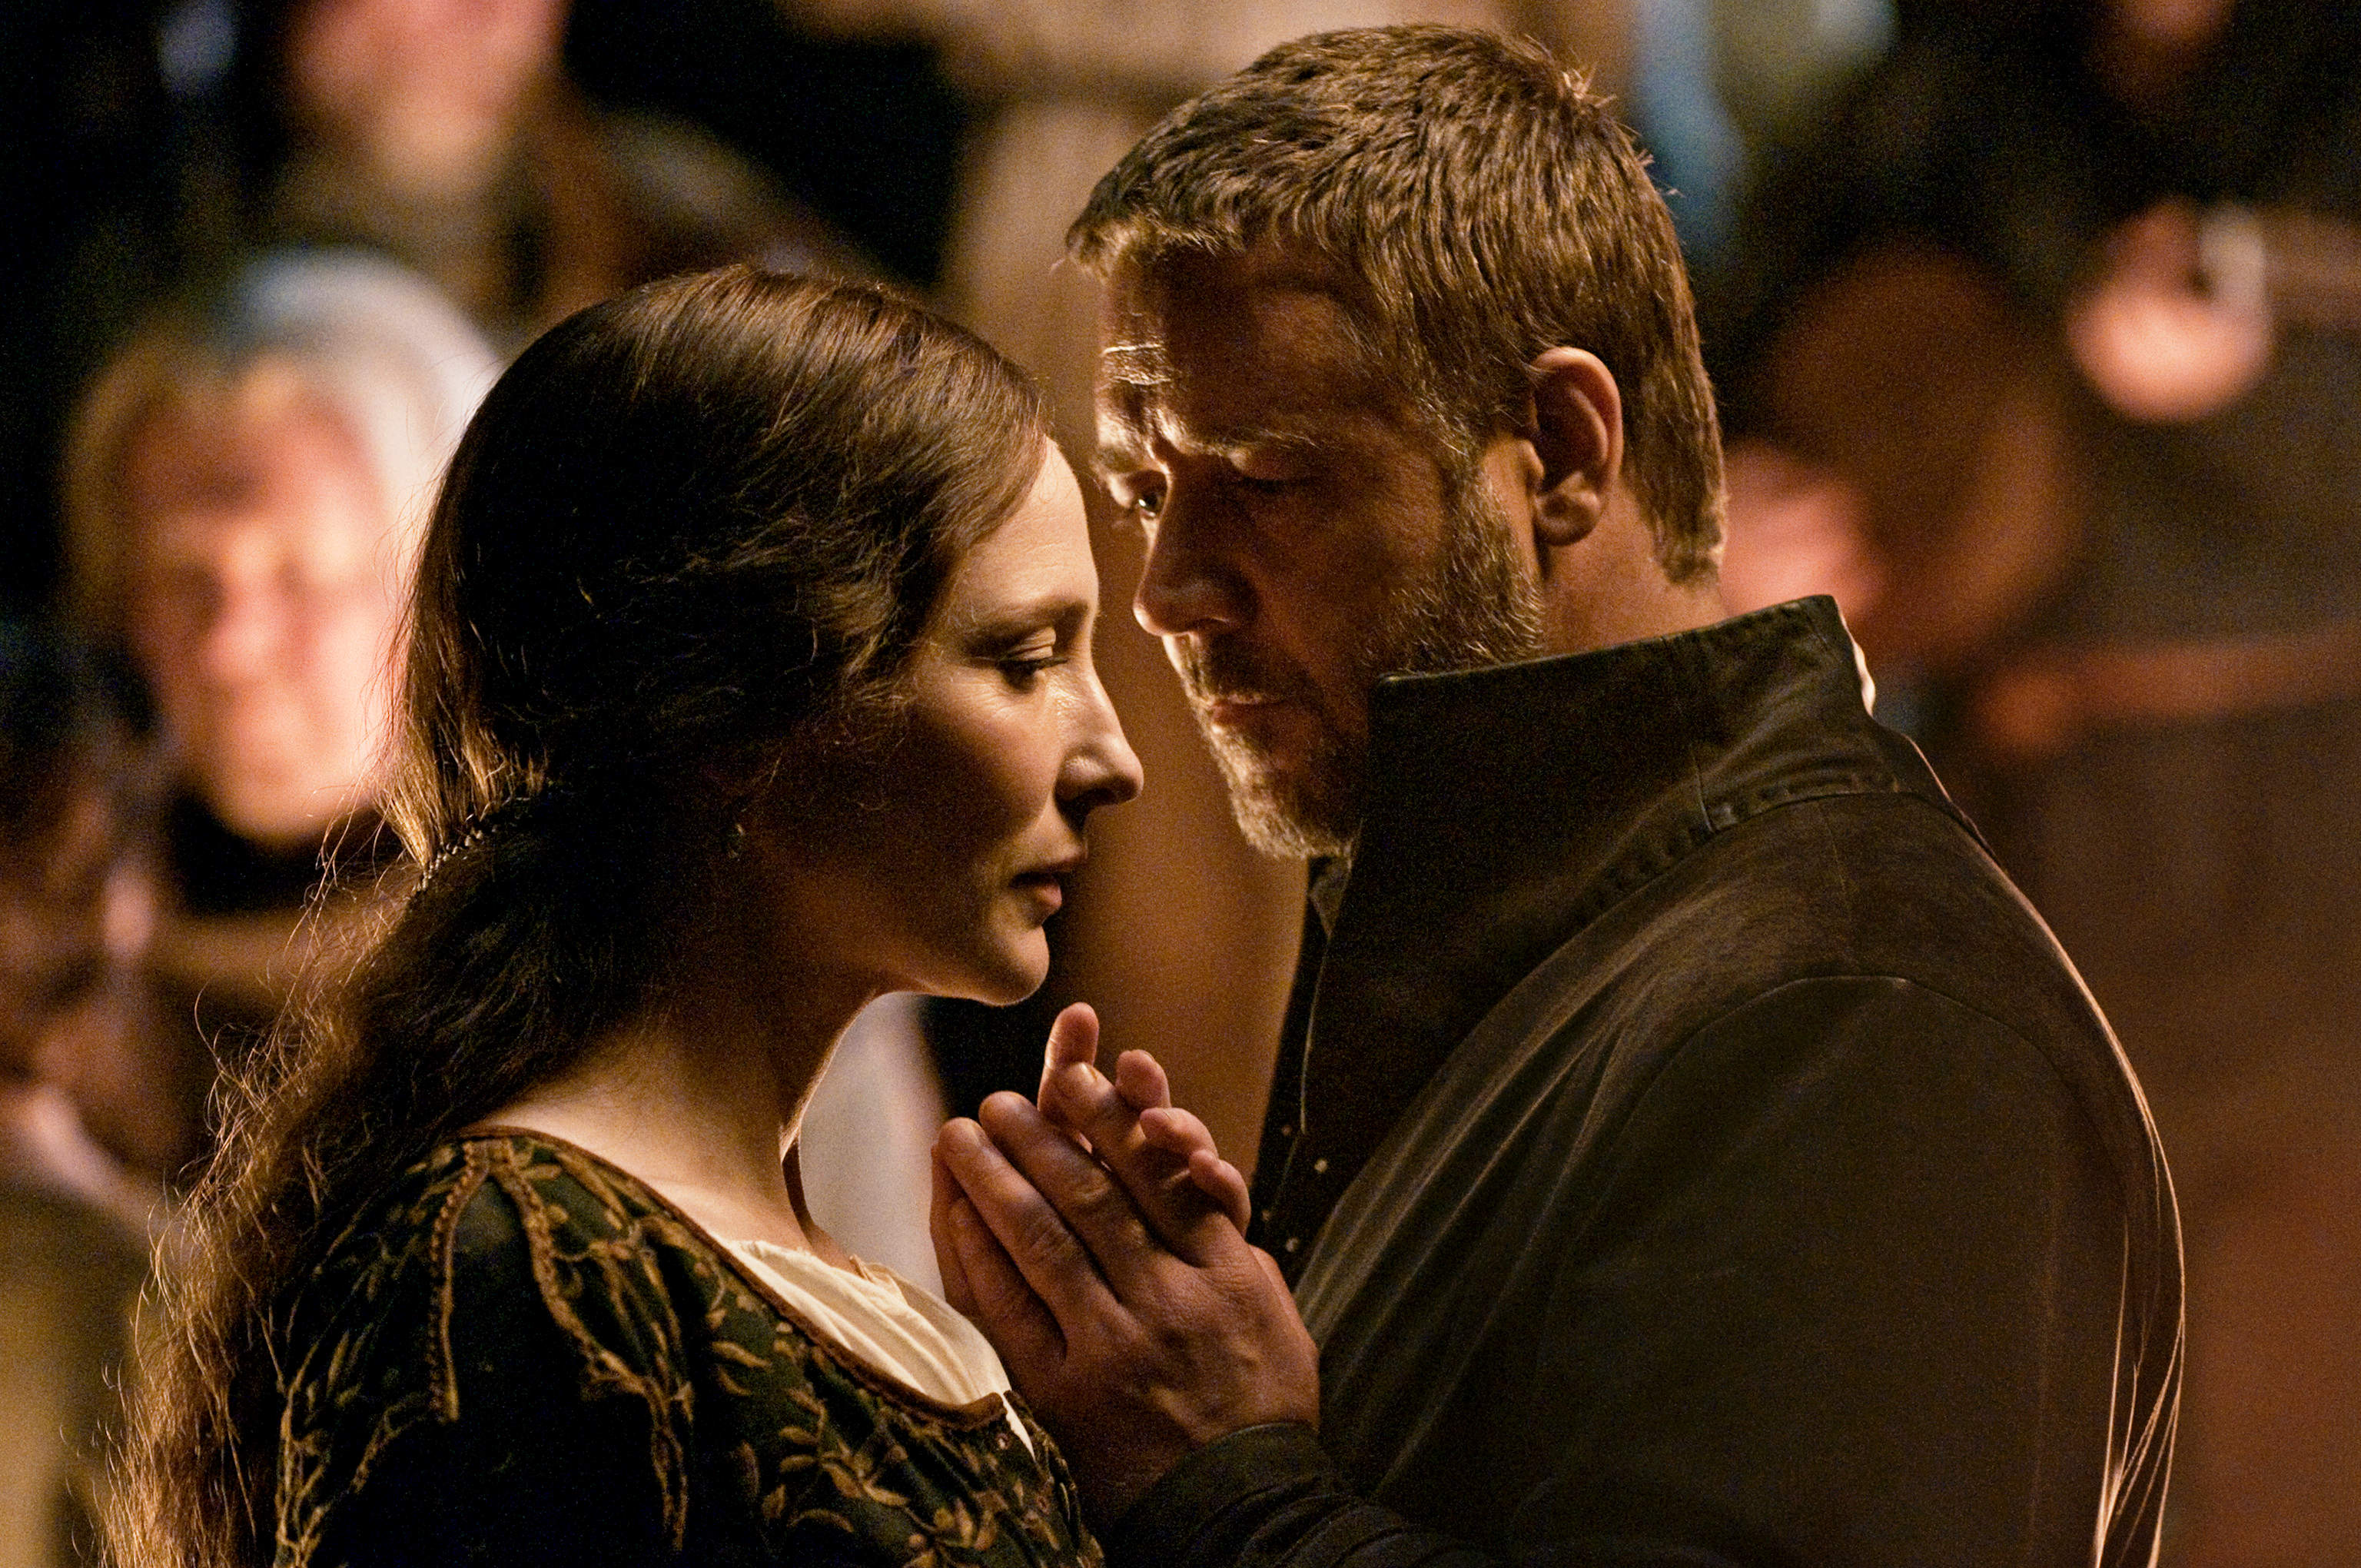 Cate Blanchett stars as Maid Marian and Russell Crowe stars as Robin Hood in Universal Pictures' Robin Hood (2010)